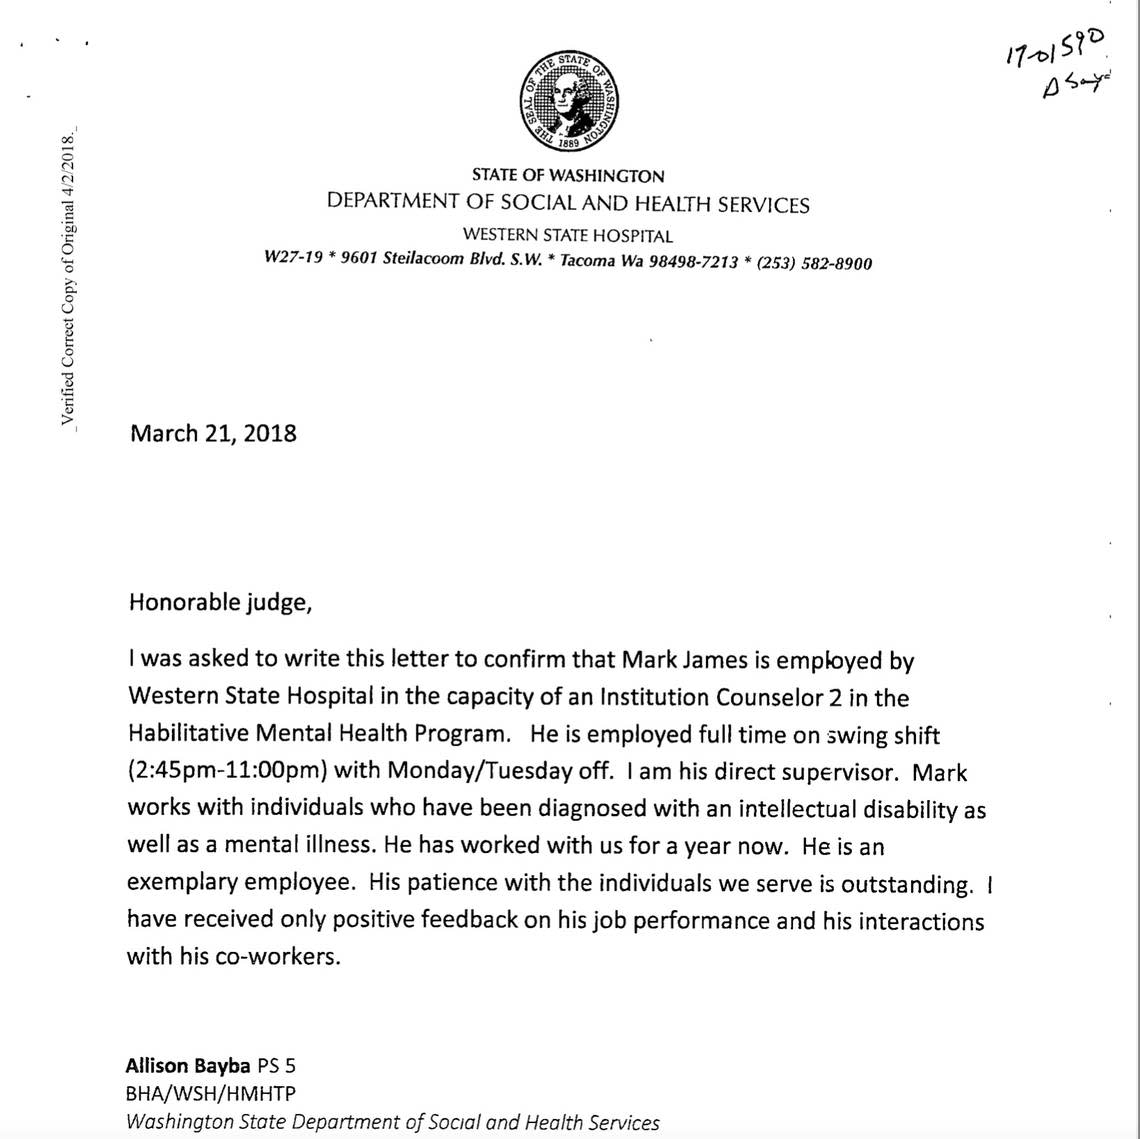 A March 21, 2018 letter to Lane County Superior Court from Allison Bayba, who supervised Mark James at Western State Hospital, referred to him as “an exemplary employee.”